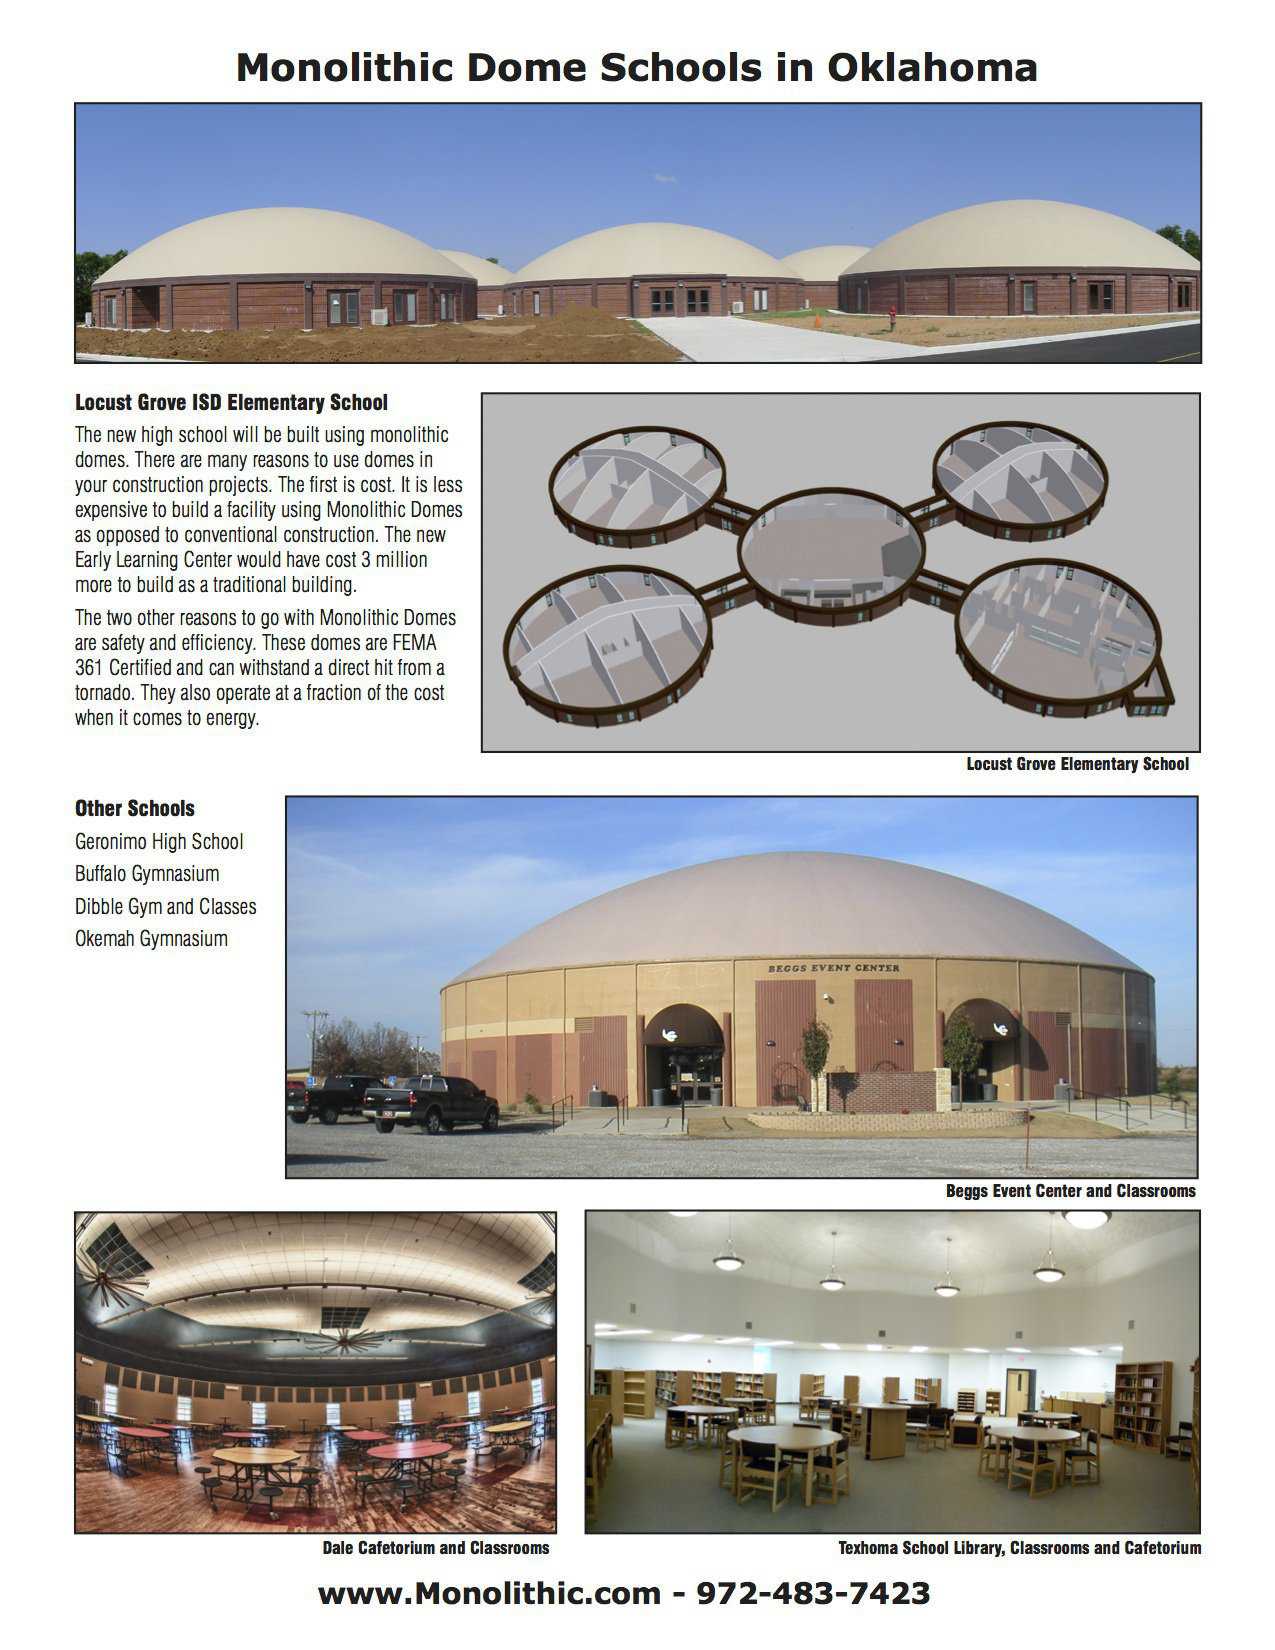 Monolithic Dome Schools – THE answer for schools in “tornado alley.”
See: http://www.monolithic.com/topics/schools